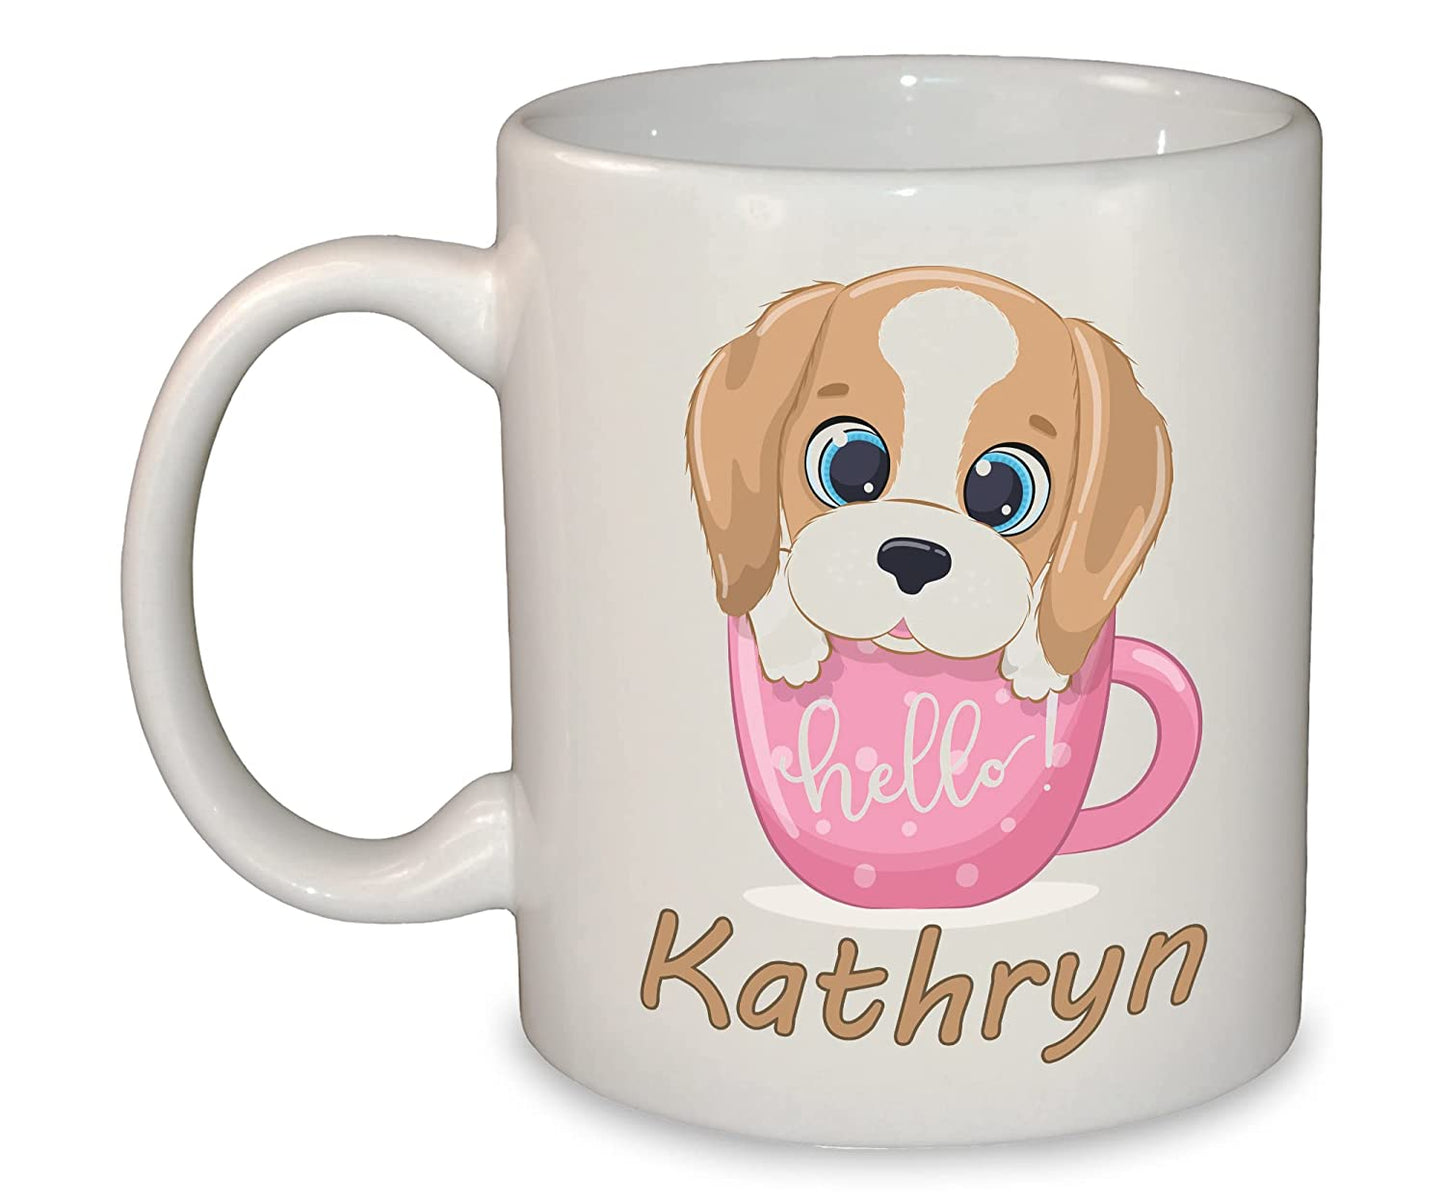 Puppy in a Mug Personalised Cup 11oz Dishwasher & Microwave safe